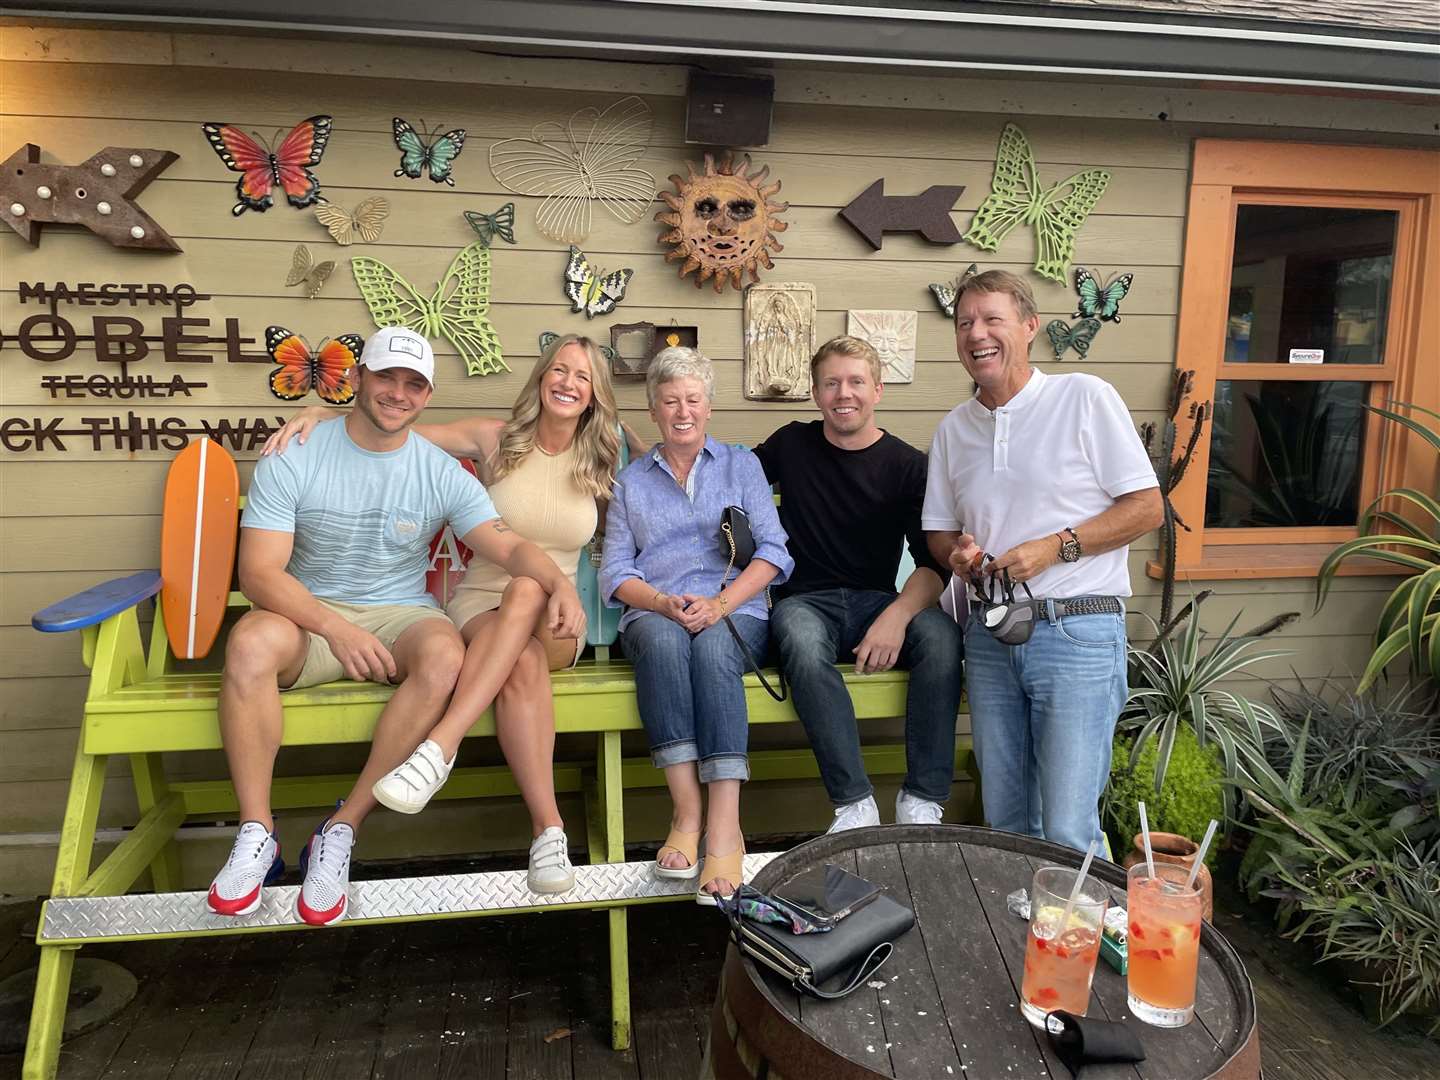 Diane celebrated her birthday with her family.